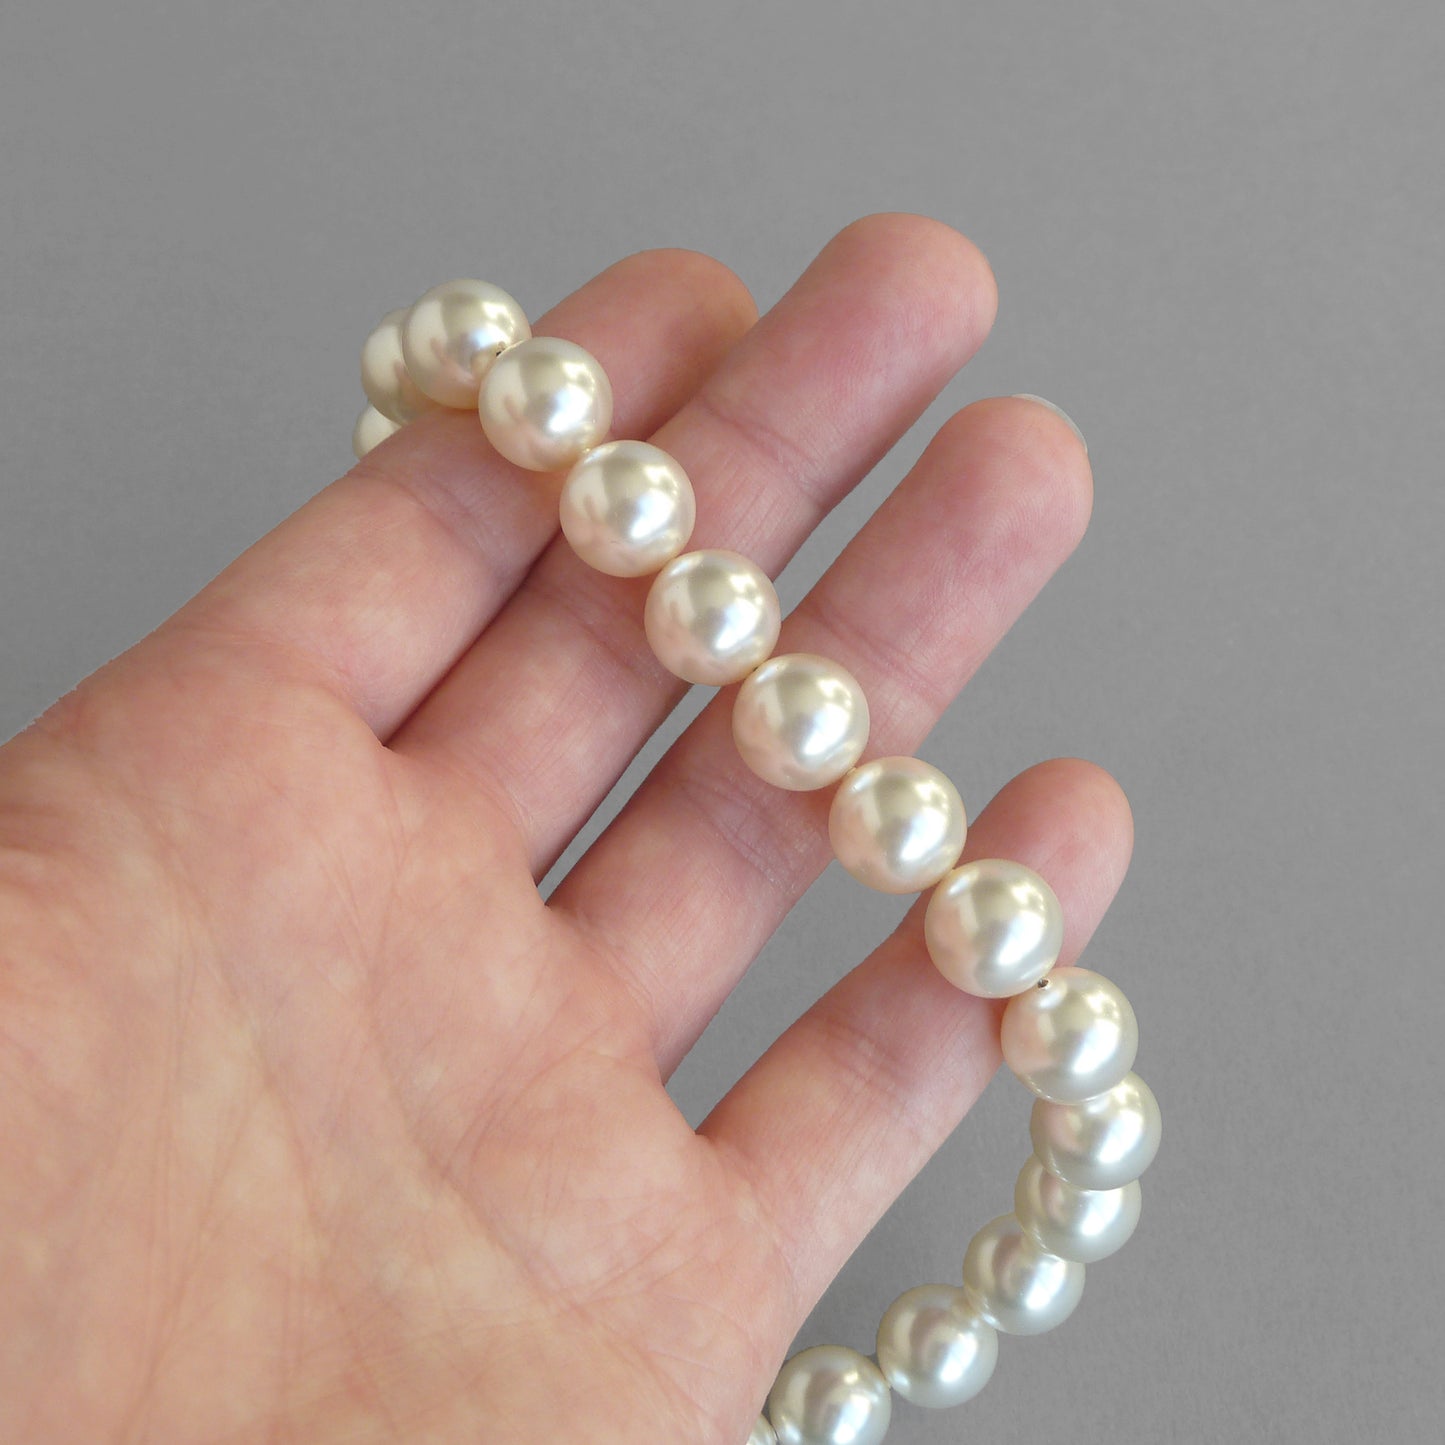 Cream glass pearl necklace for women